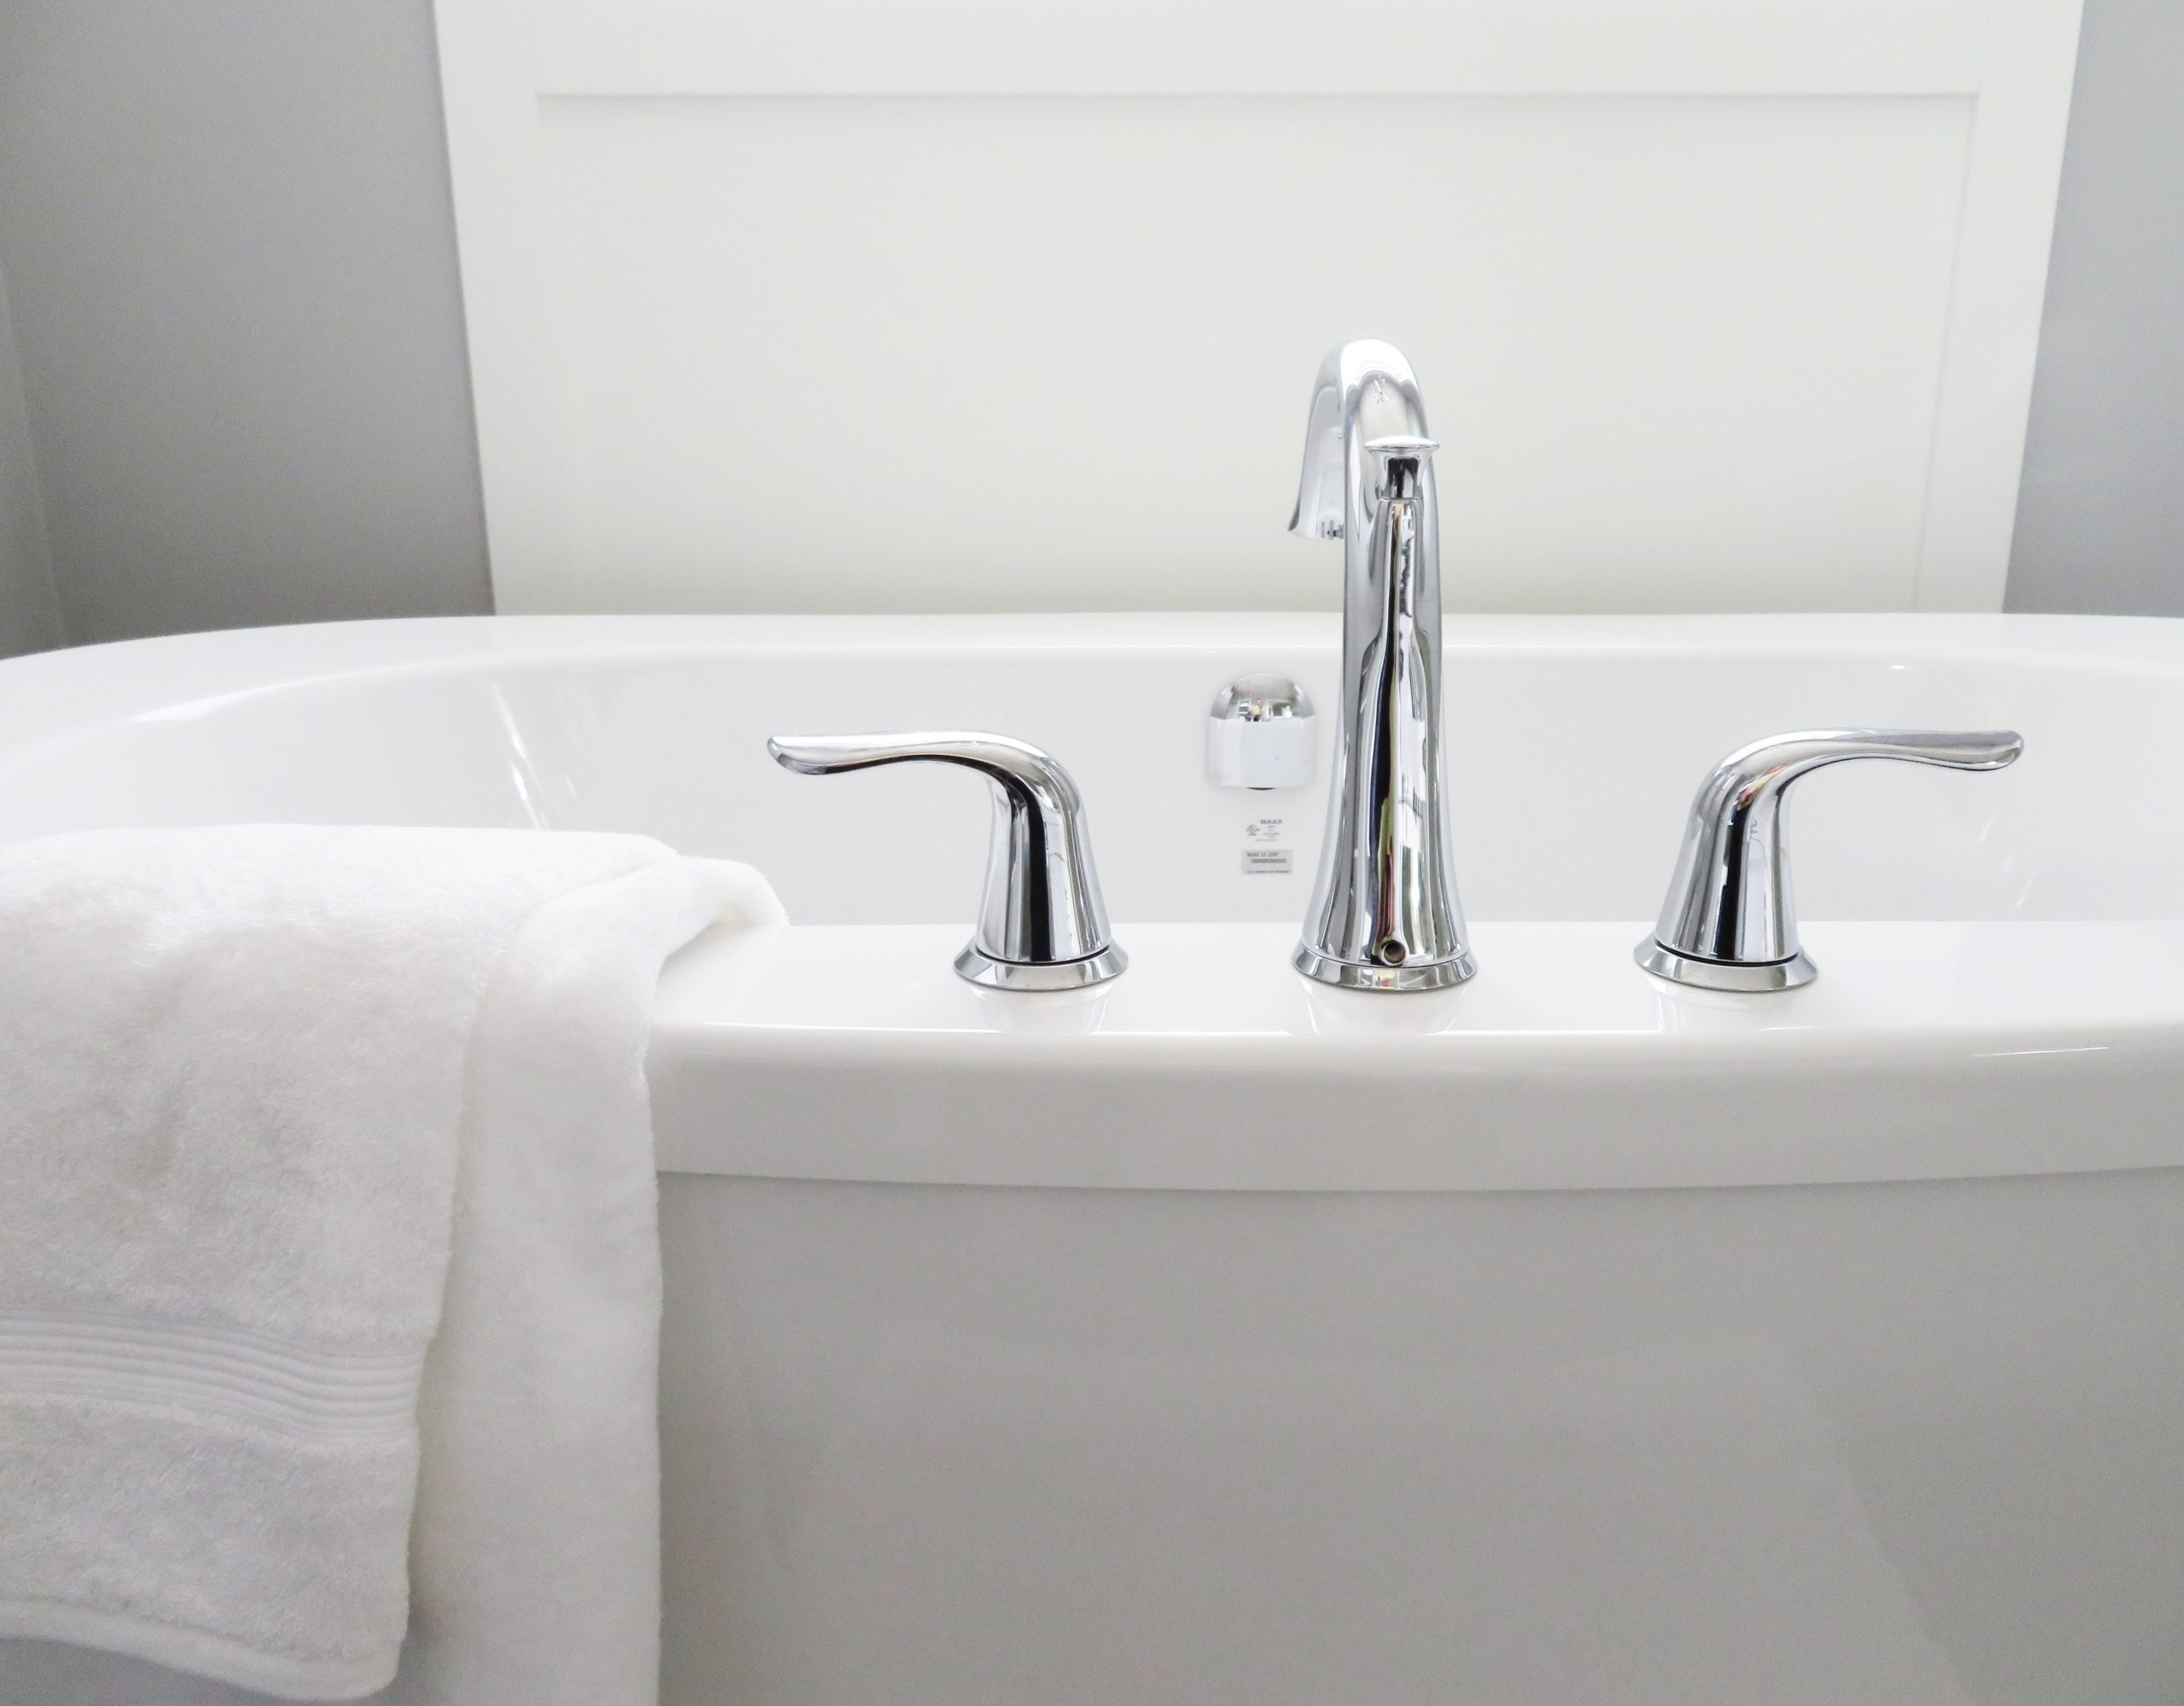 A polished faucet and handles on a bathtub. A white towel is draped over the side of the tub.